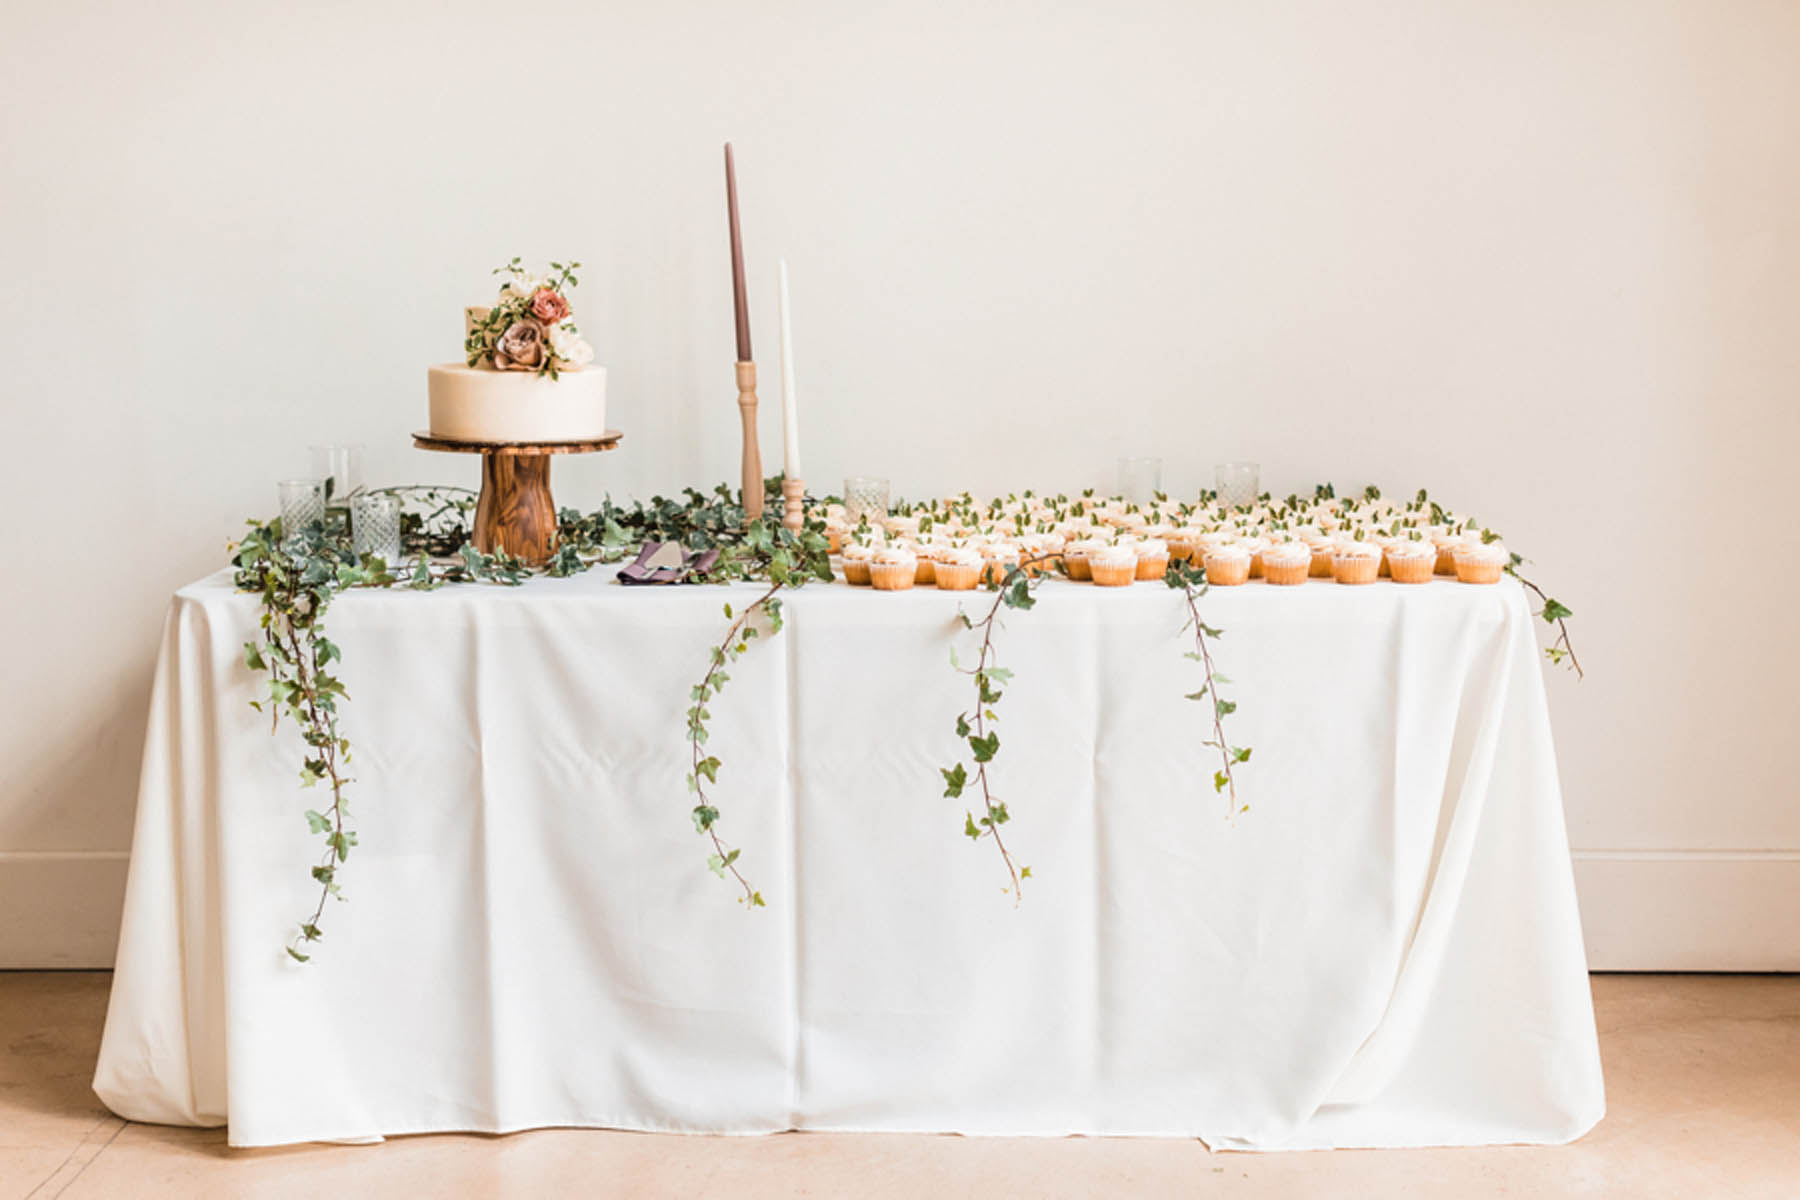 A rectangular table with a white tablecloth holds a small cake and cupcakes. There are two candles and many strands of greenery around the table.